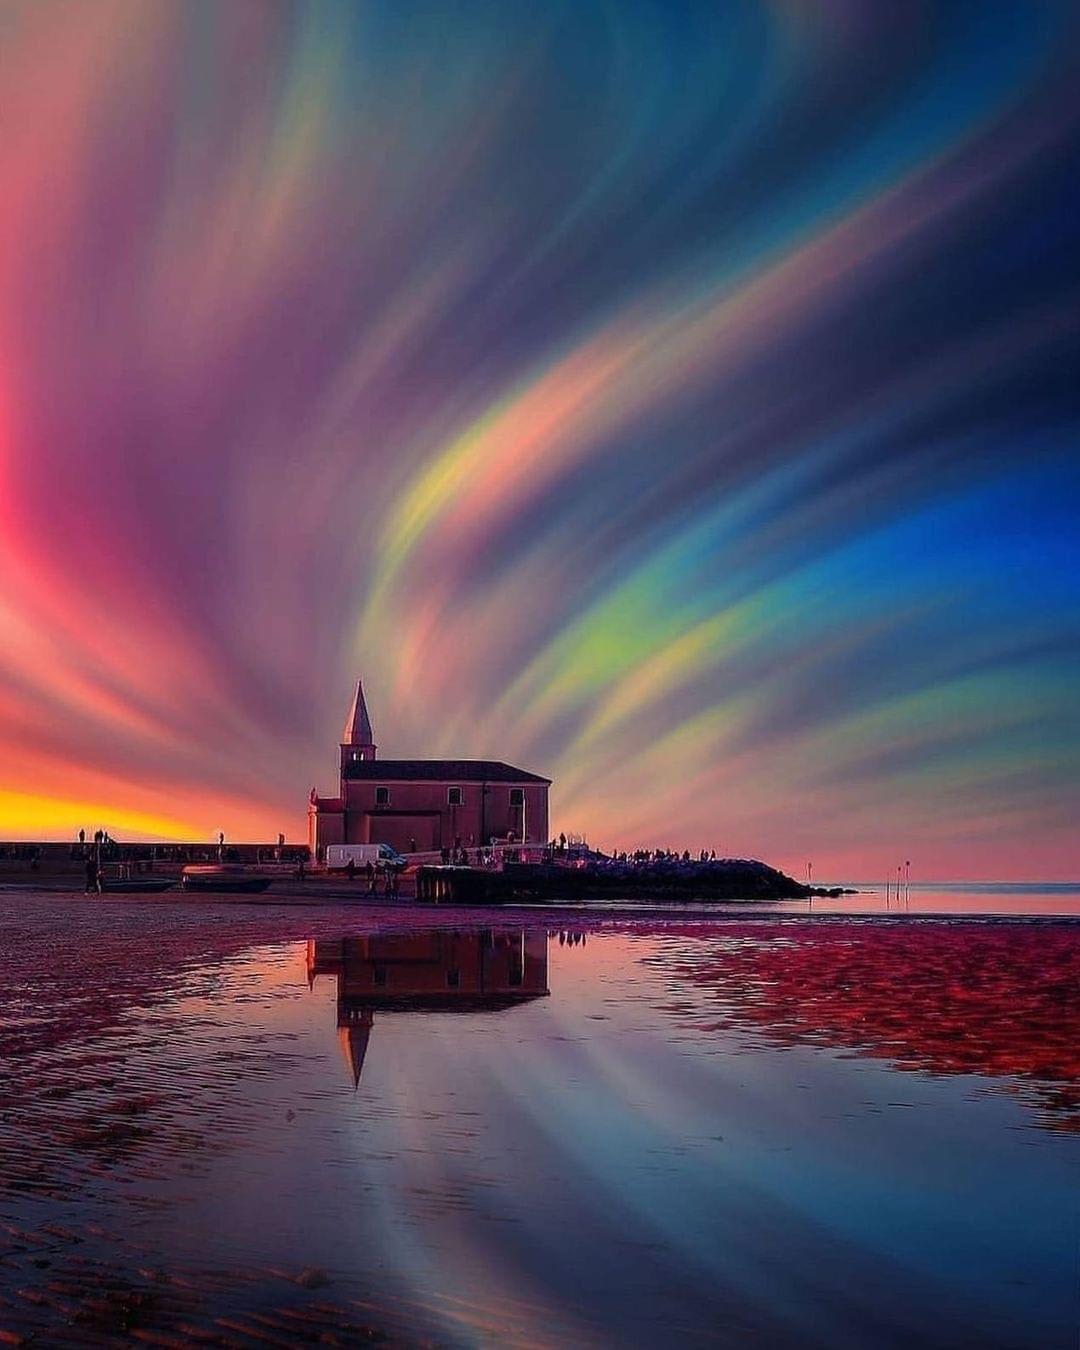 This sky in Italy